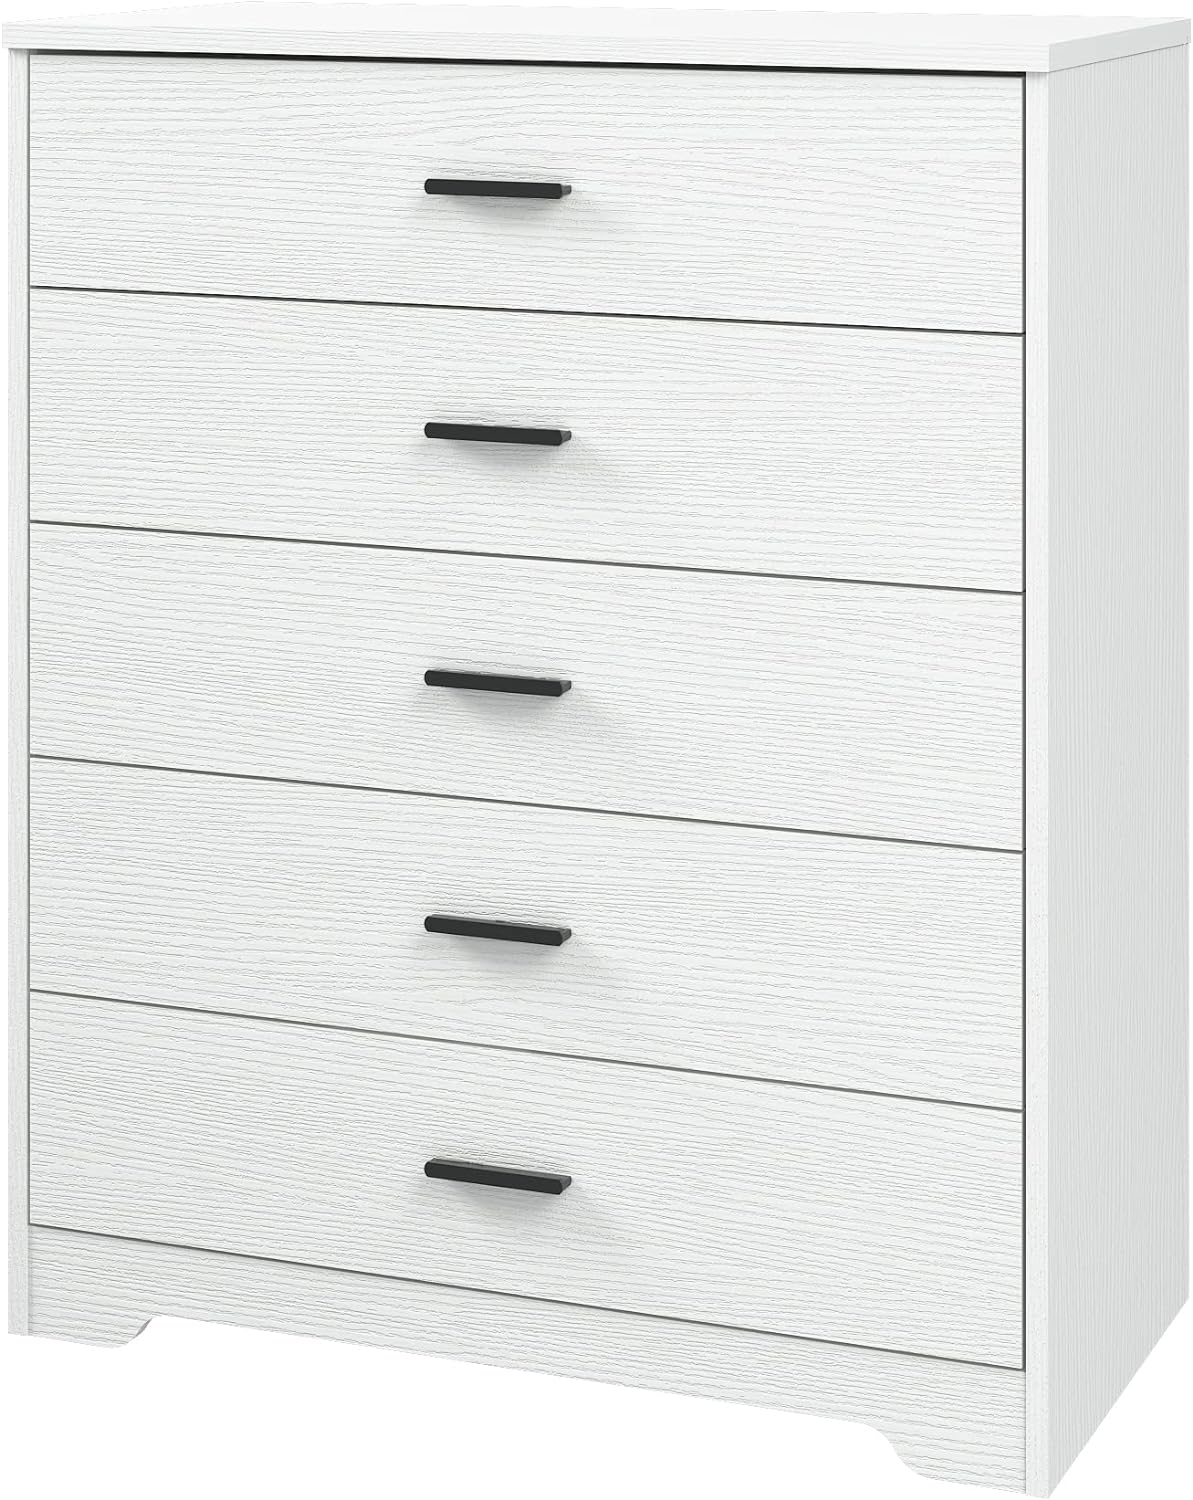 The dresser is super short but is good quality for the price.